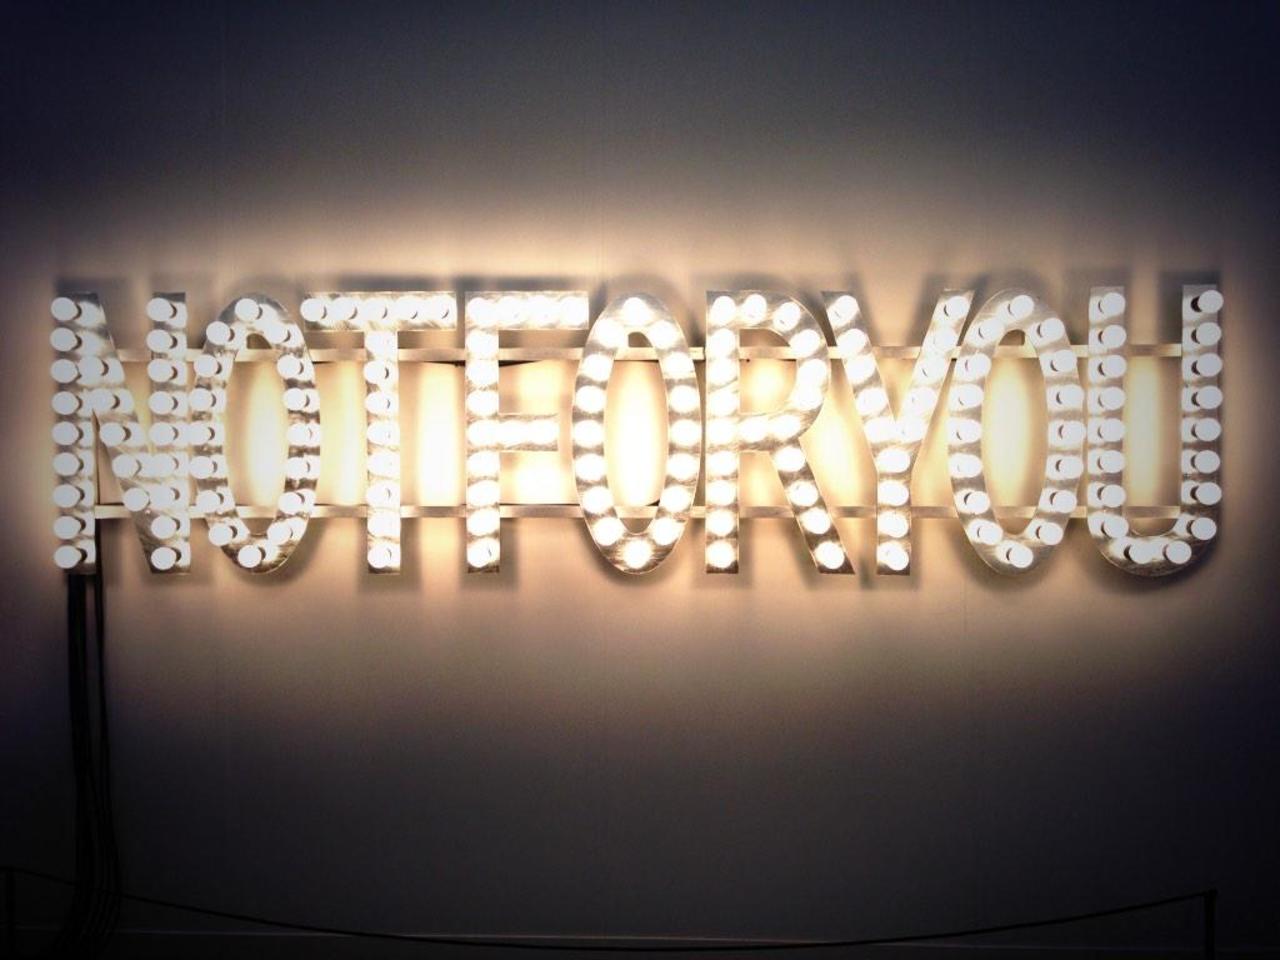 Some things are just #notforyou @FriezeLondon #lightart #art http://t.co/DTG2Lu5g5C